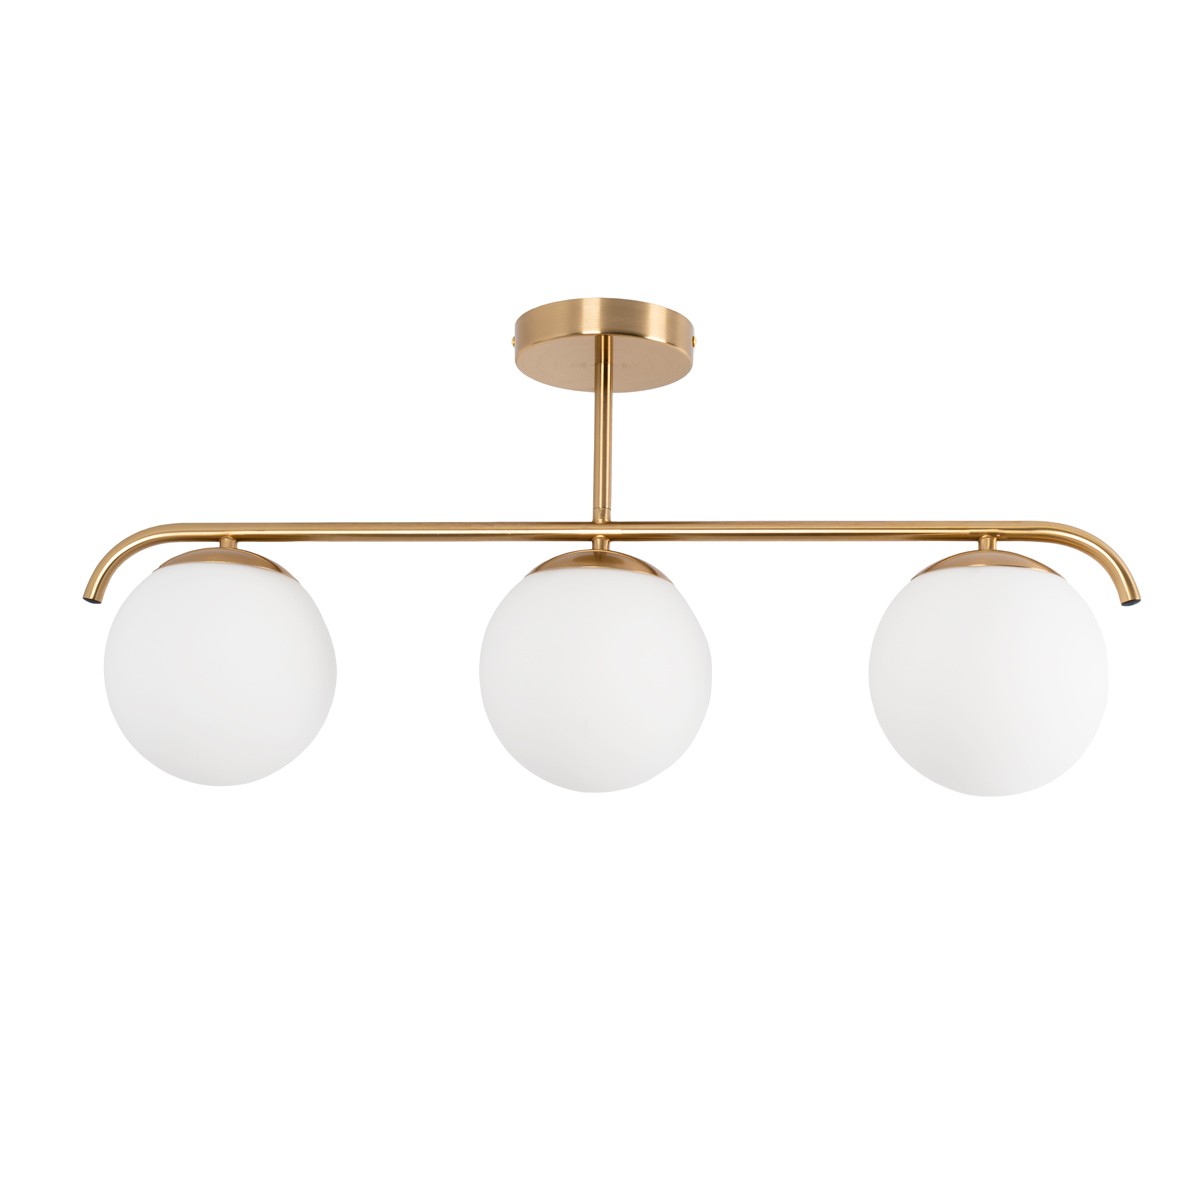 TALÍ" triple interior ceiling lamp - Metal and glass - 3xE27